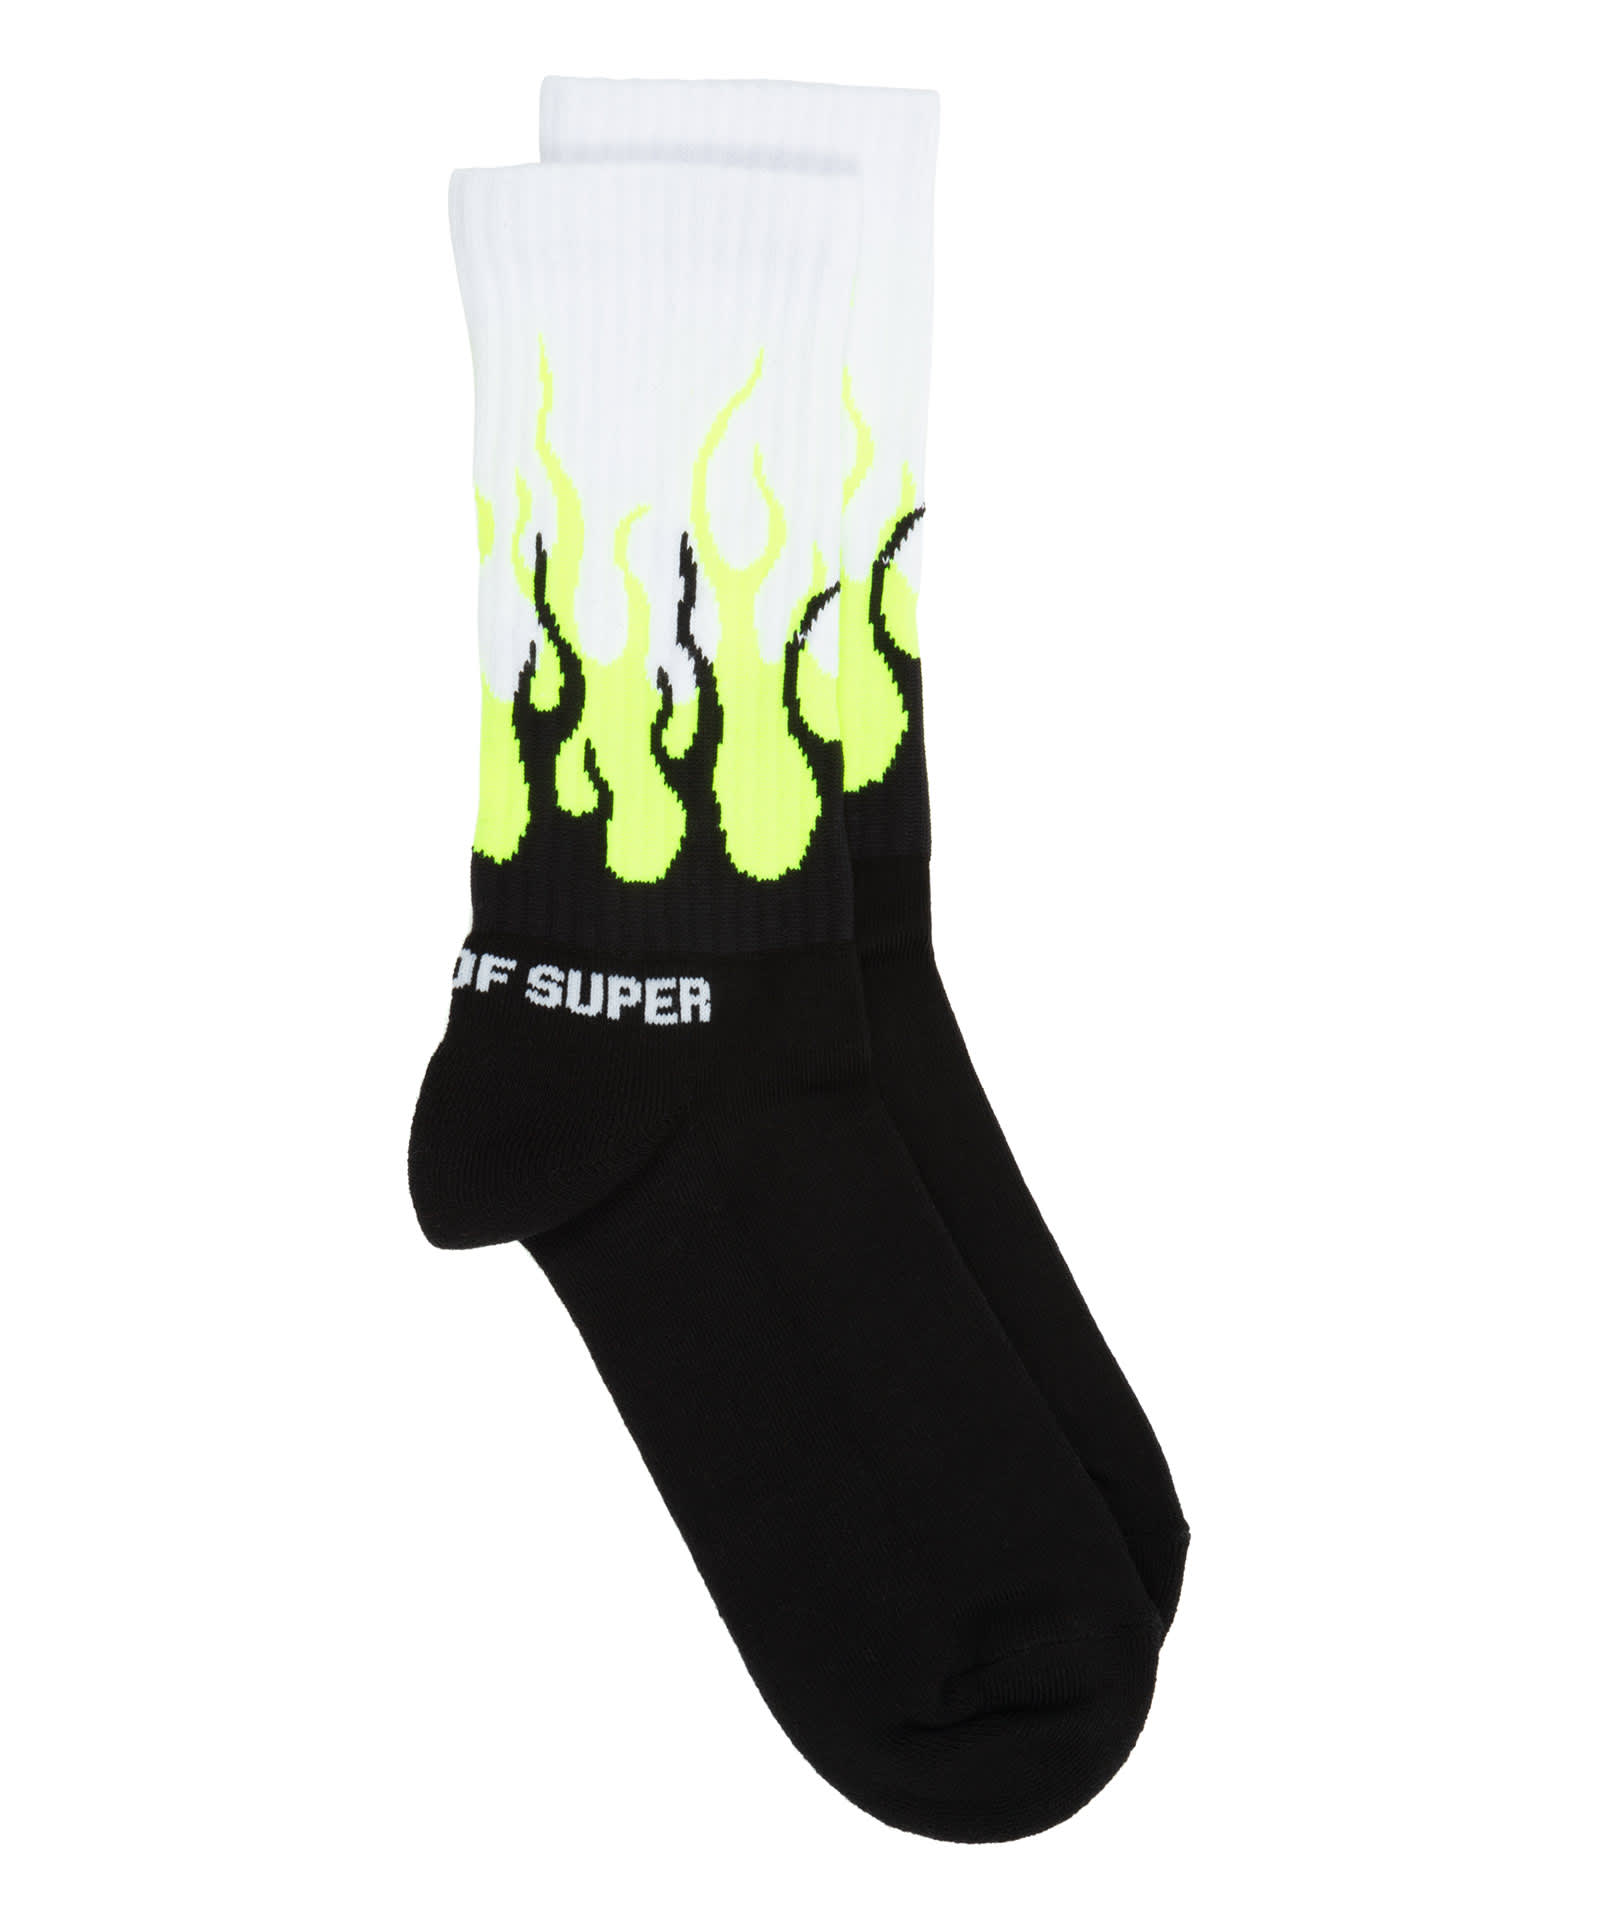 Vision of Super Flames Double Cotton Socks